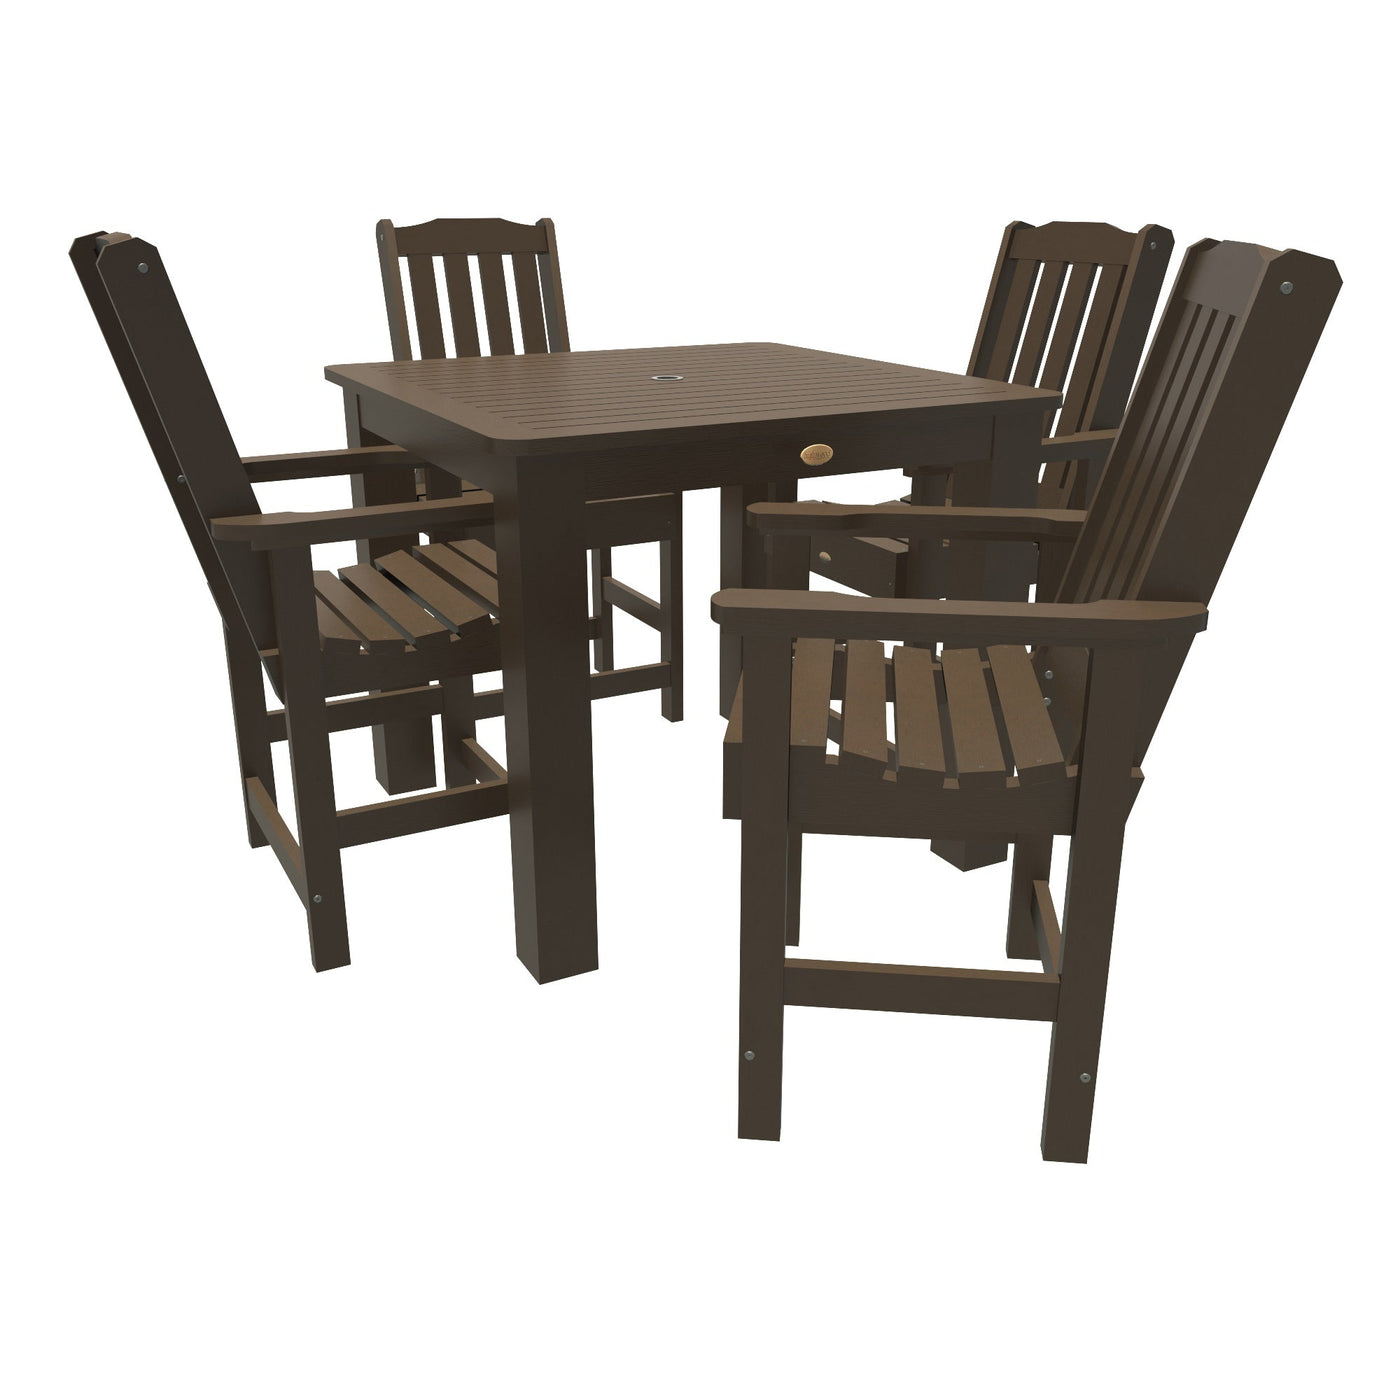 Lehigh 5pc Square Dining Set 42in x 42in - Counter Height Dining Highwood USA Weathered Acorn 